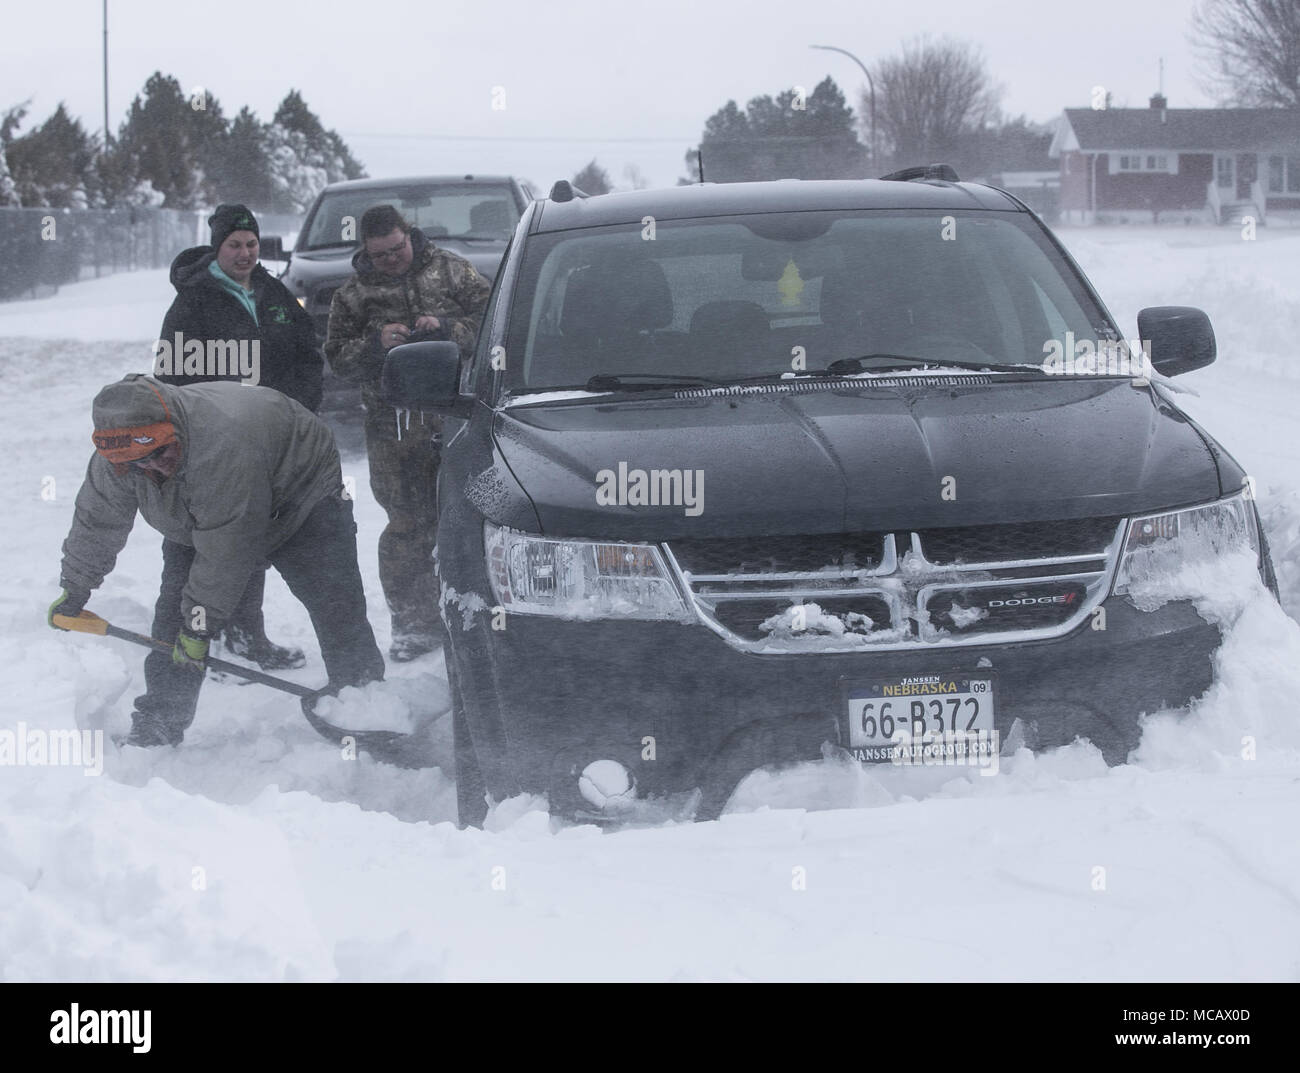 April 14, 2018 - DJ Bromlich, foreground, attempts to help free a Dodge Journey SUV that got stuck in a snowdrift owned by Shelby Buechel, background right, as her friend Kaylin Riser, background left, looks on in Valentine, Nebr. on Sat., April 14, 2018. A historic late season blizzard struck the Northern Plains Friday and Saturday with storm total accumulations ranging from 1-2 feet and sustained winds of 35-45 mph with gusts in excess of 60 mph, closing dozens of roads including Interstate 80 and leading Nebraska Governor Pete Ricketts to declare a state of emergency. Photographer/byline/ Stock Photo